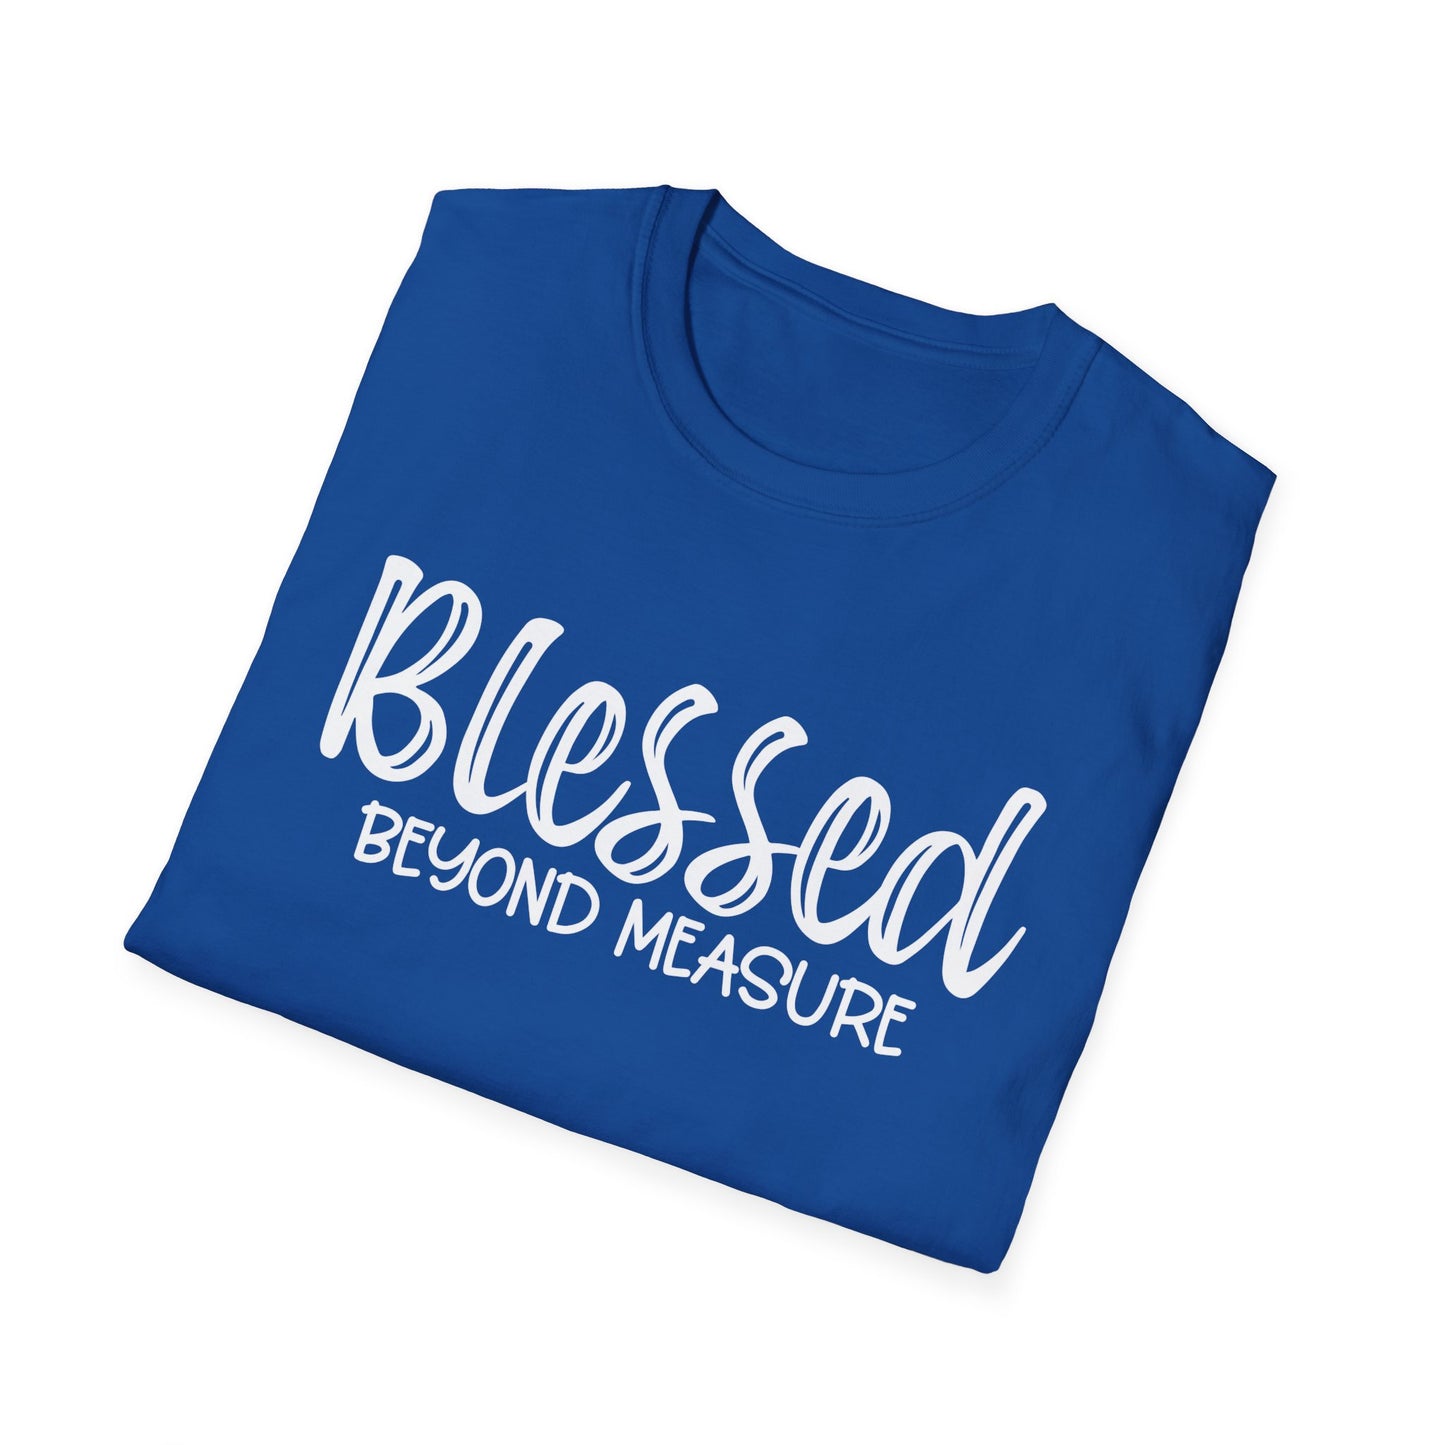 Blessed Beyond Measure Unisex Softstyle T-Shirt